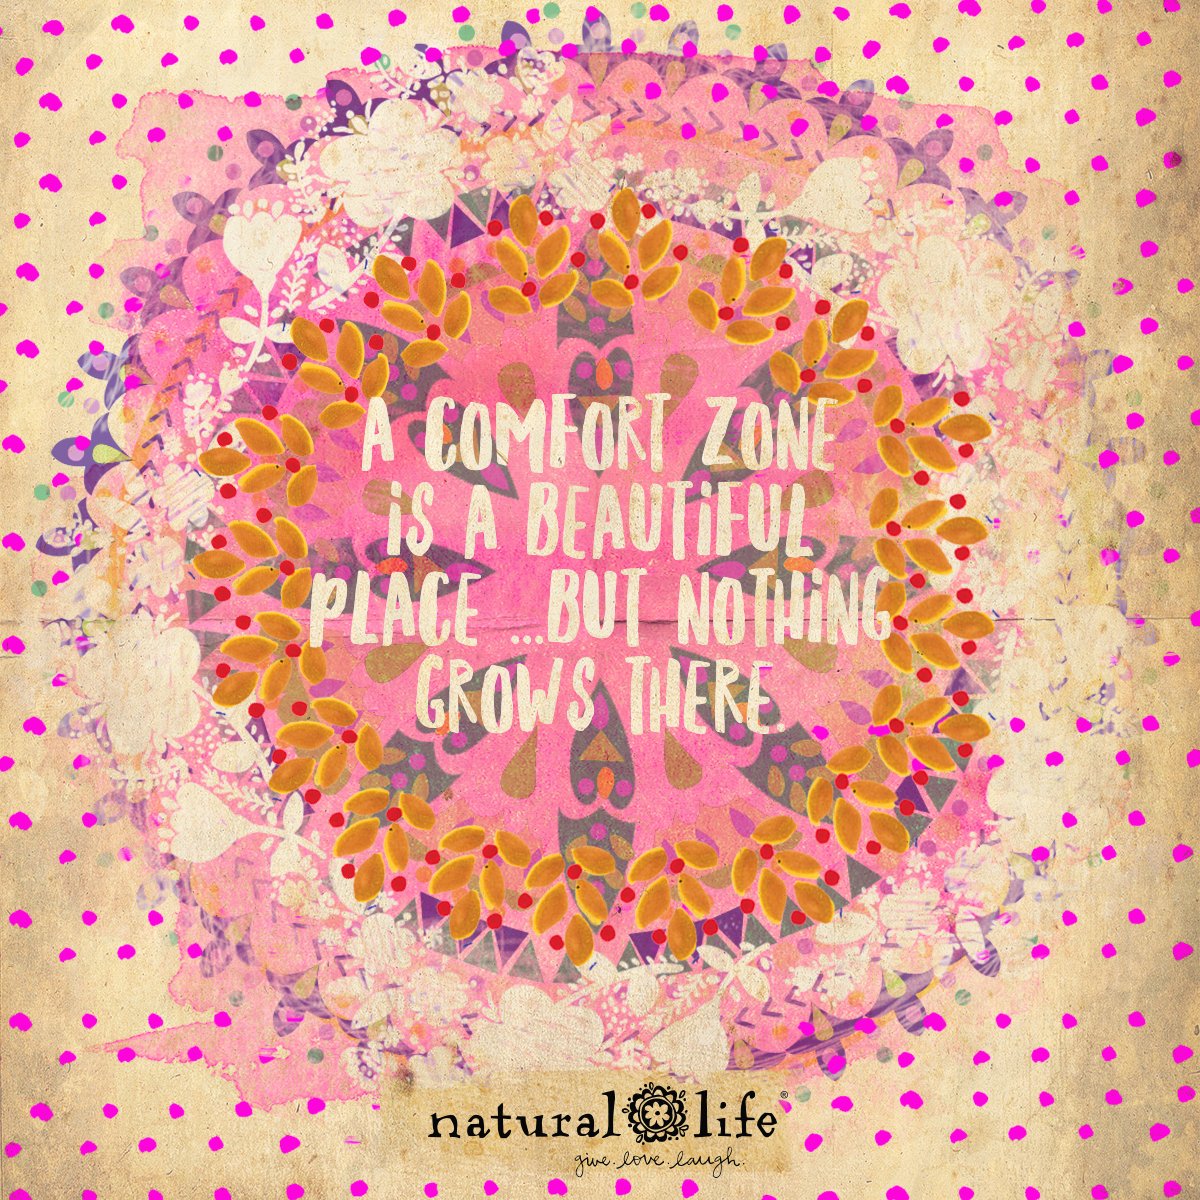 Natural life has the cutest quotes, check them out!